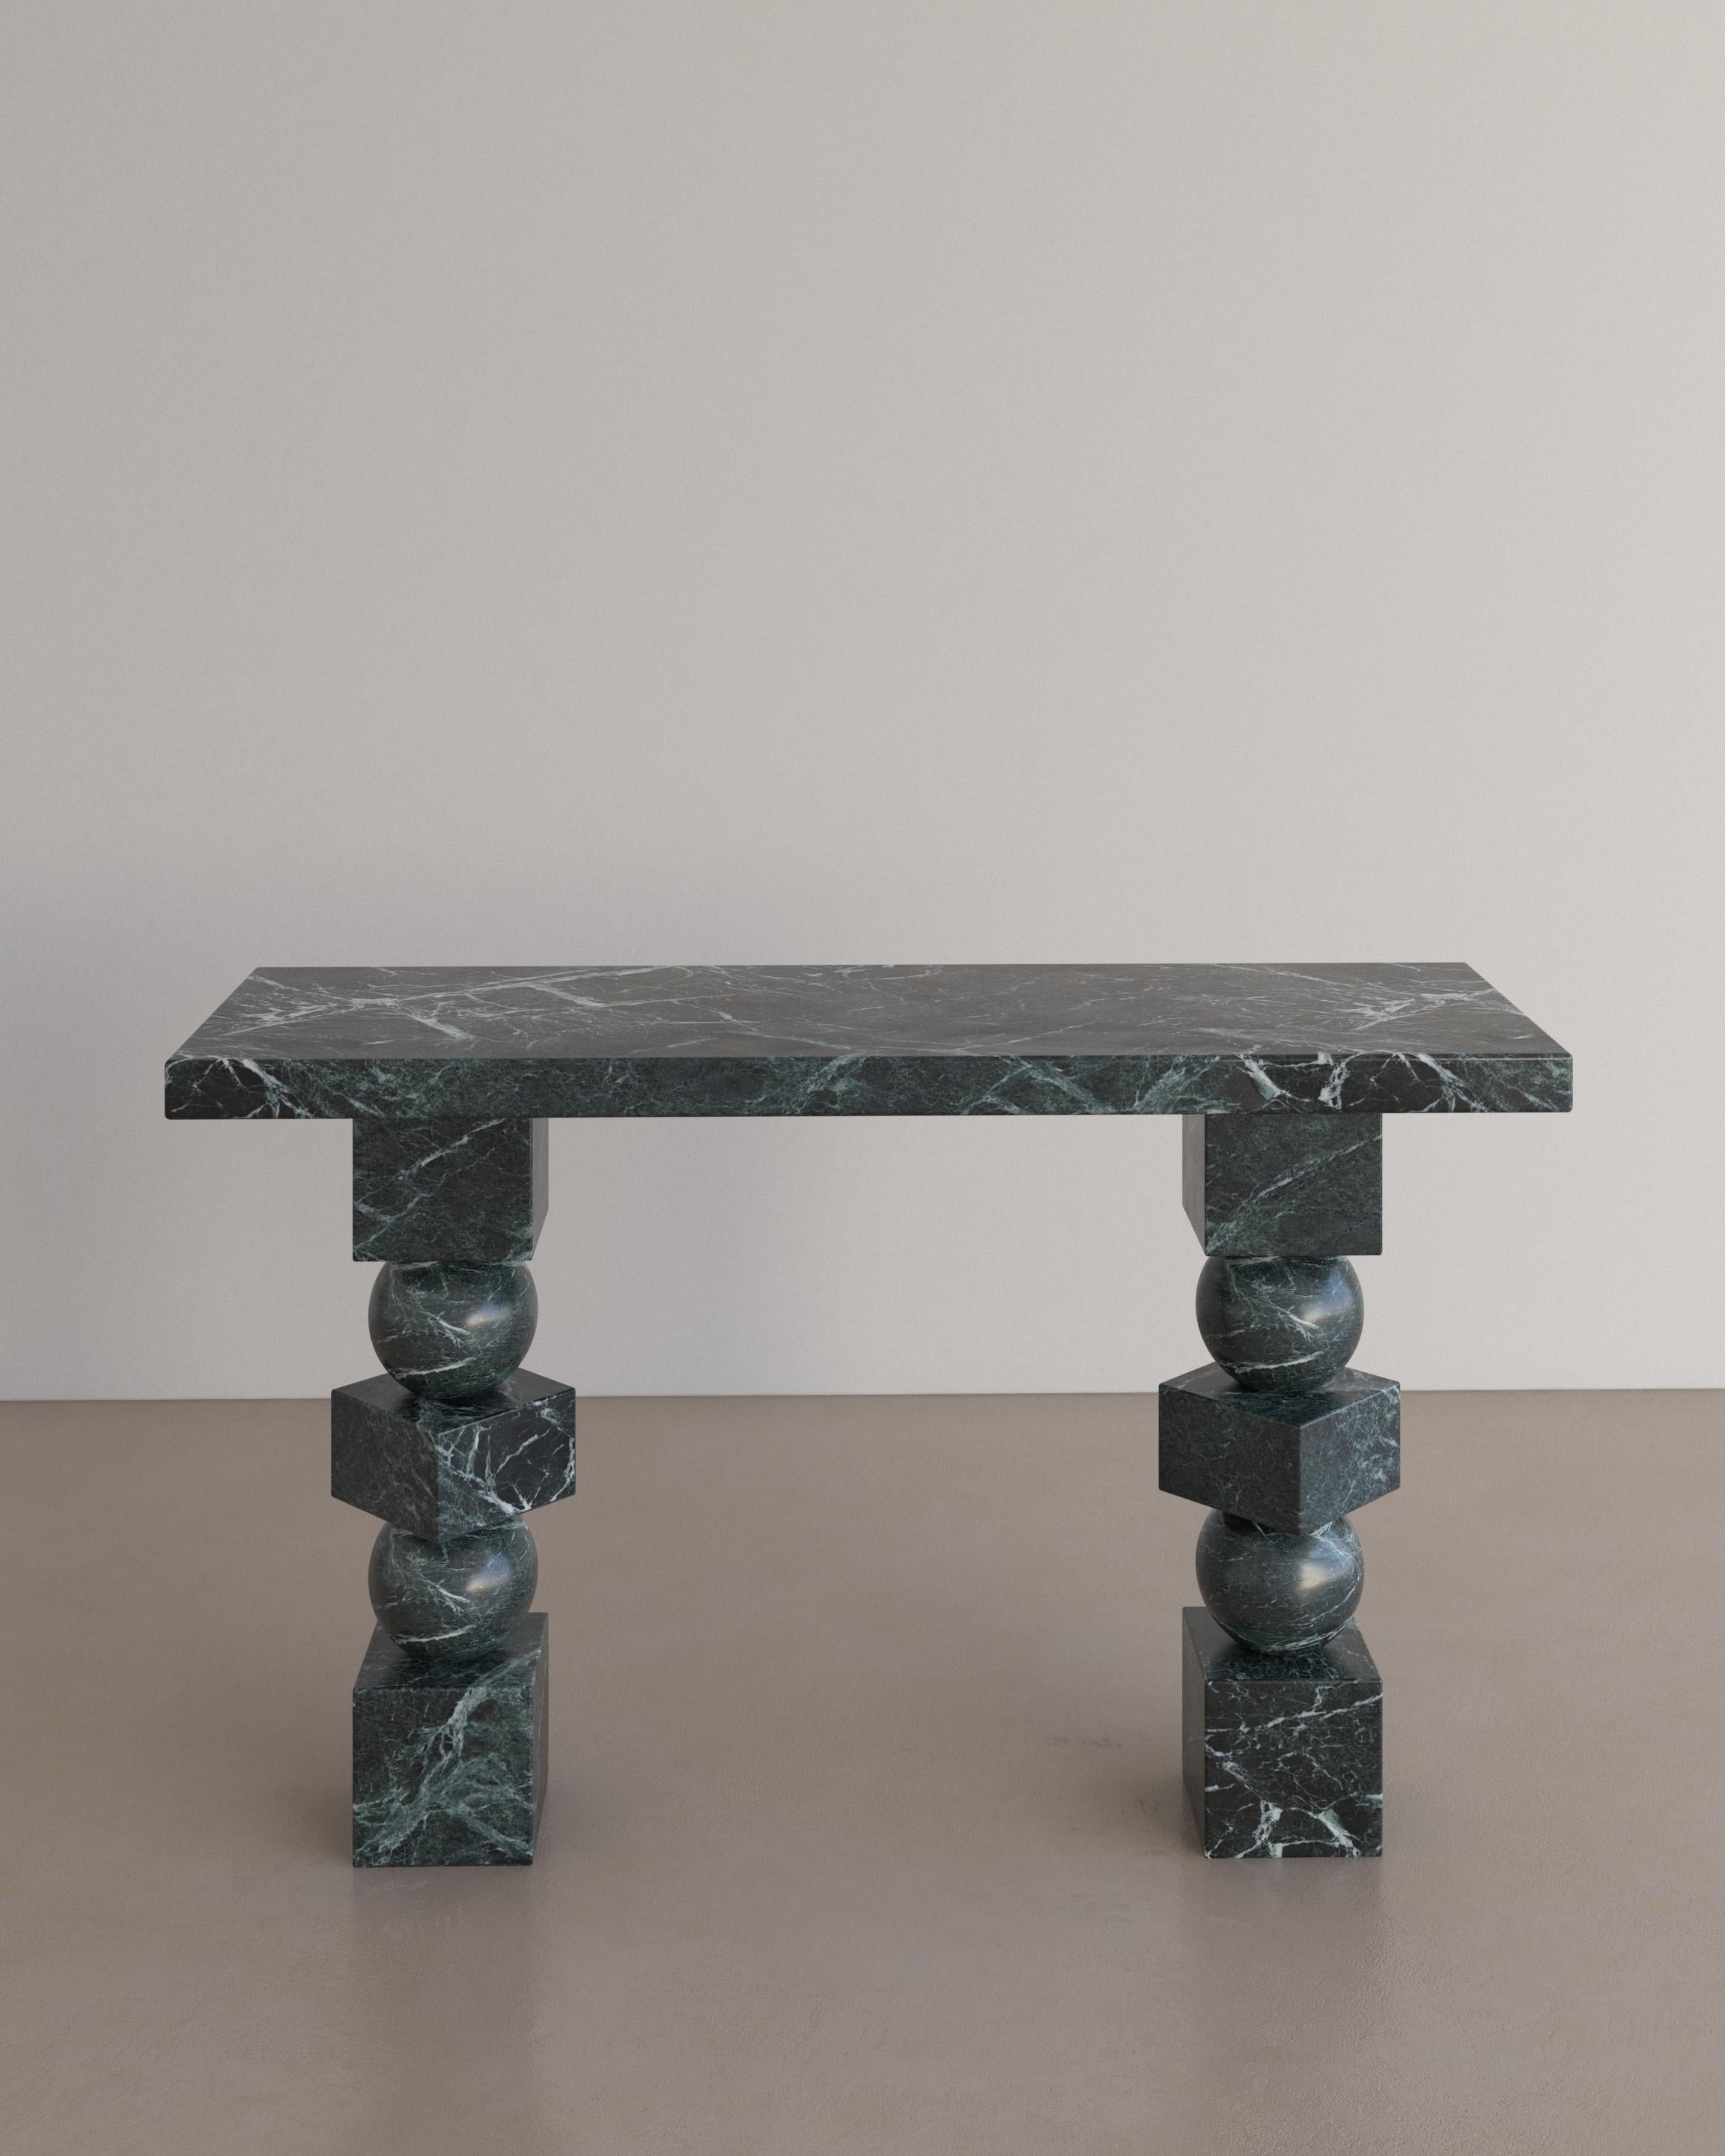 The Sufi Console Table in Verde Alpi Marble by The Essentialist celebrates proportion, scale and ancestral power. Three simple geometric shapes, stacked in a sequence bursts with undeniable energy, courtesy of the natural stone they are carved from.